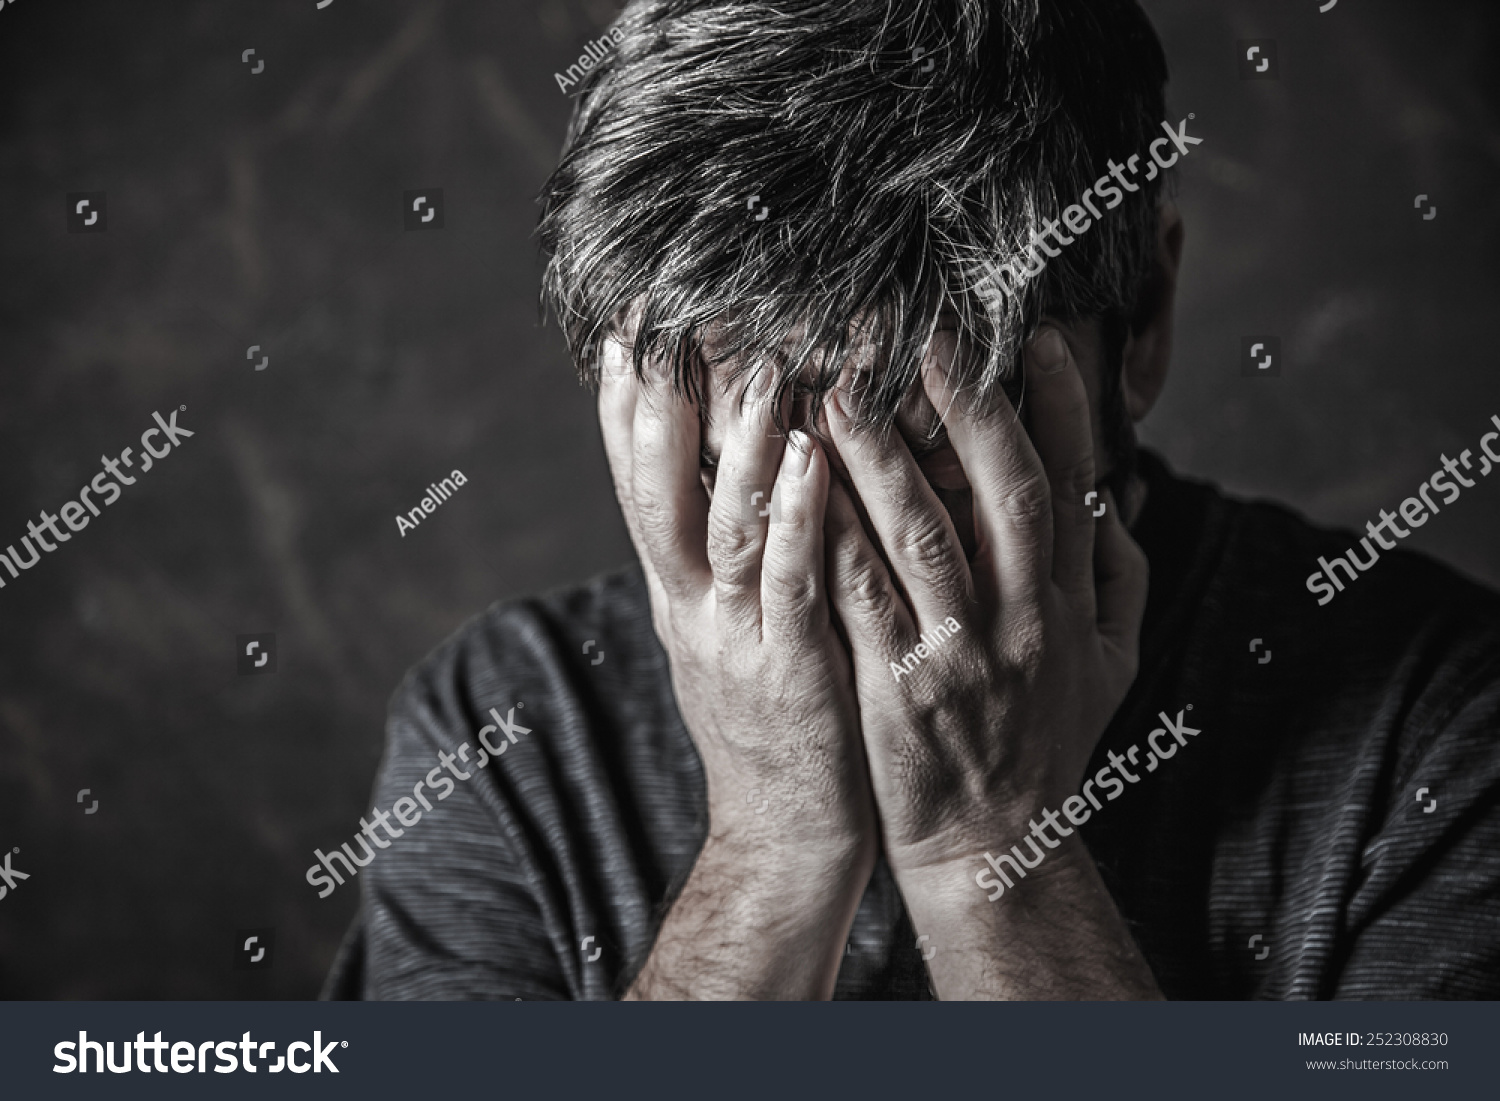 Man Closed His Eyes To Pray Stock Photo 252308830 : Shutterstock